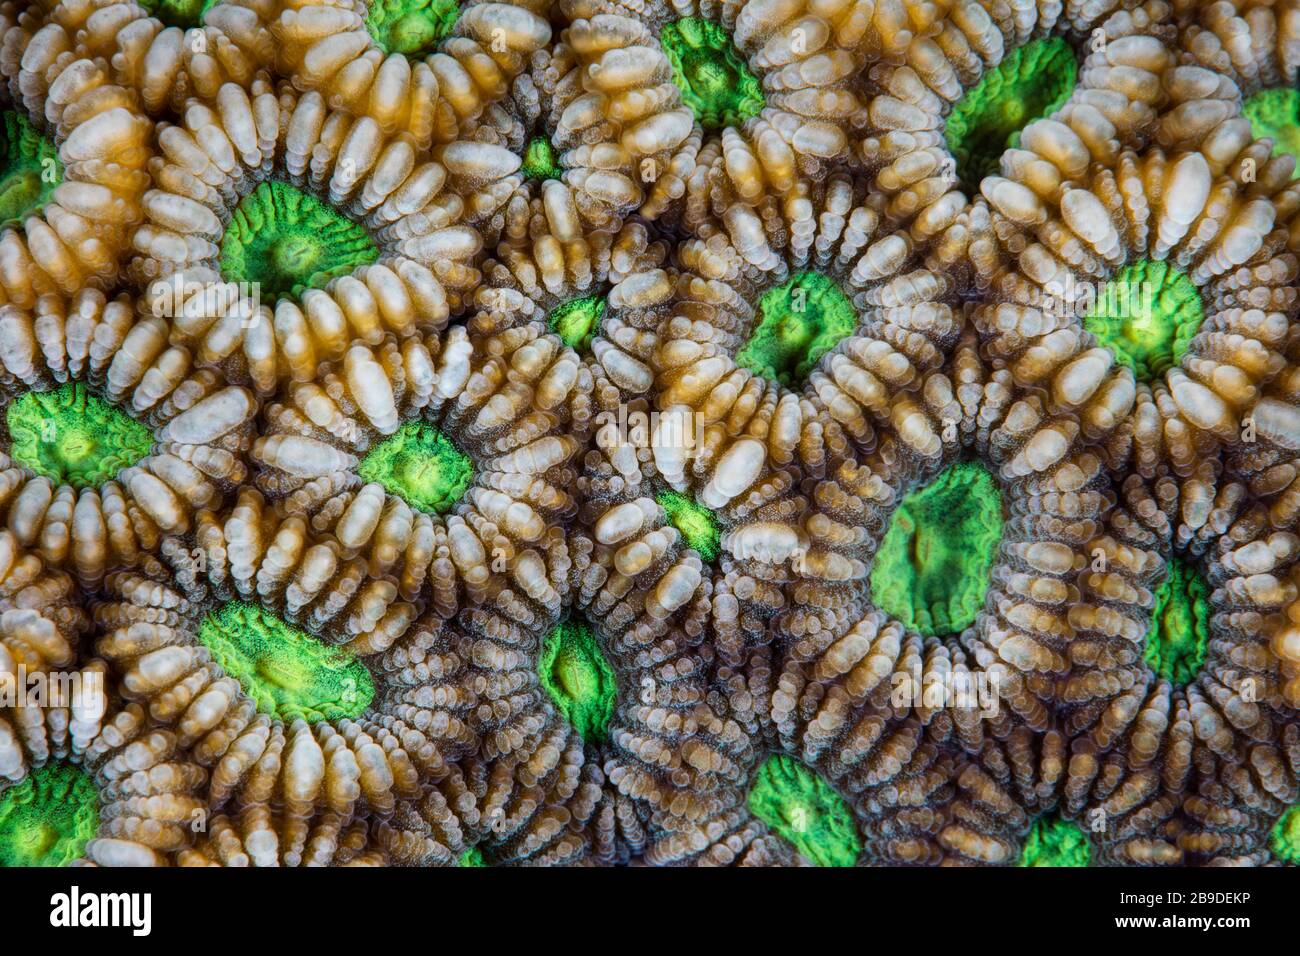 Detail of a reef-building coral colony, Favia sp., growing on a healthy reef. Stock Photo